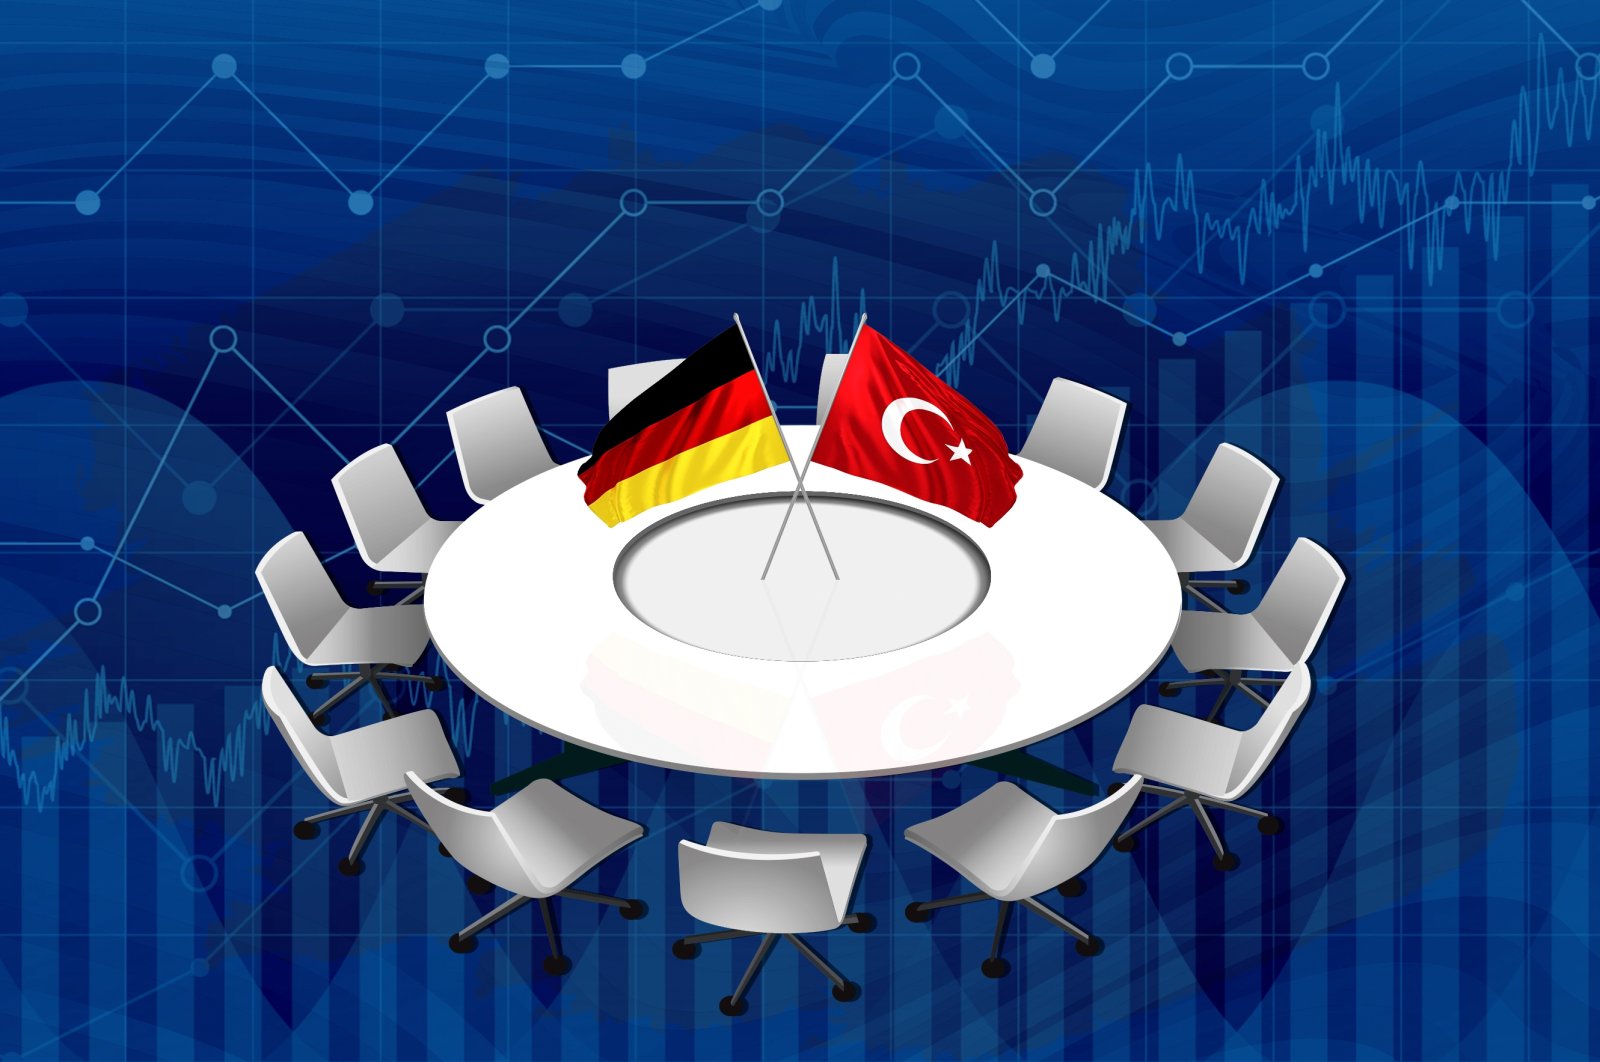 A photo illustration by Daily Sabah's Büşra Öztürk shows the flags of Turkey and Germany, symbolizing the relations of the two countries.